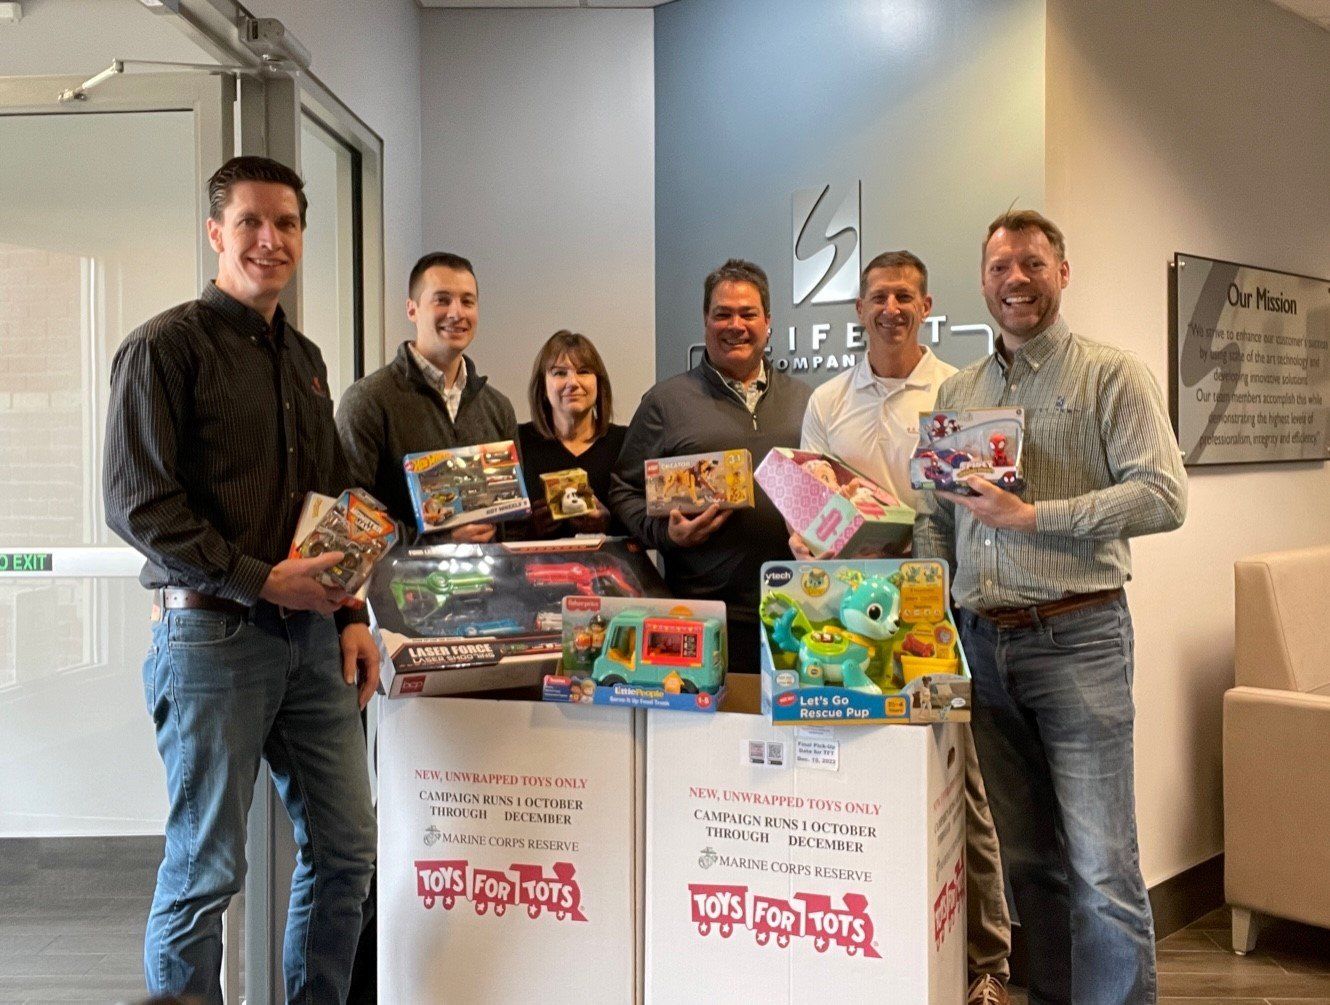 Carl, Ed, Angela Tim, Doug and Eric shown with Toys for Toys for Tots